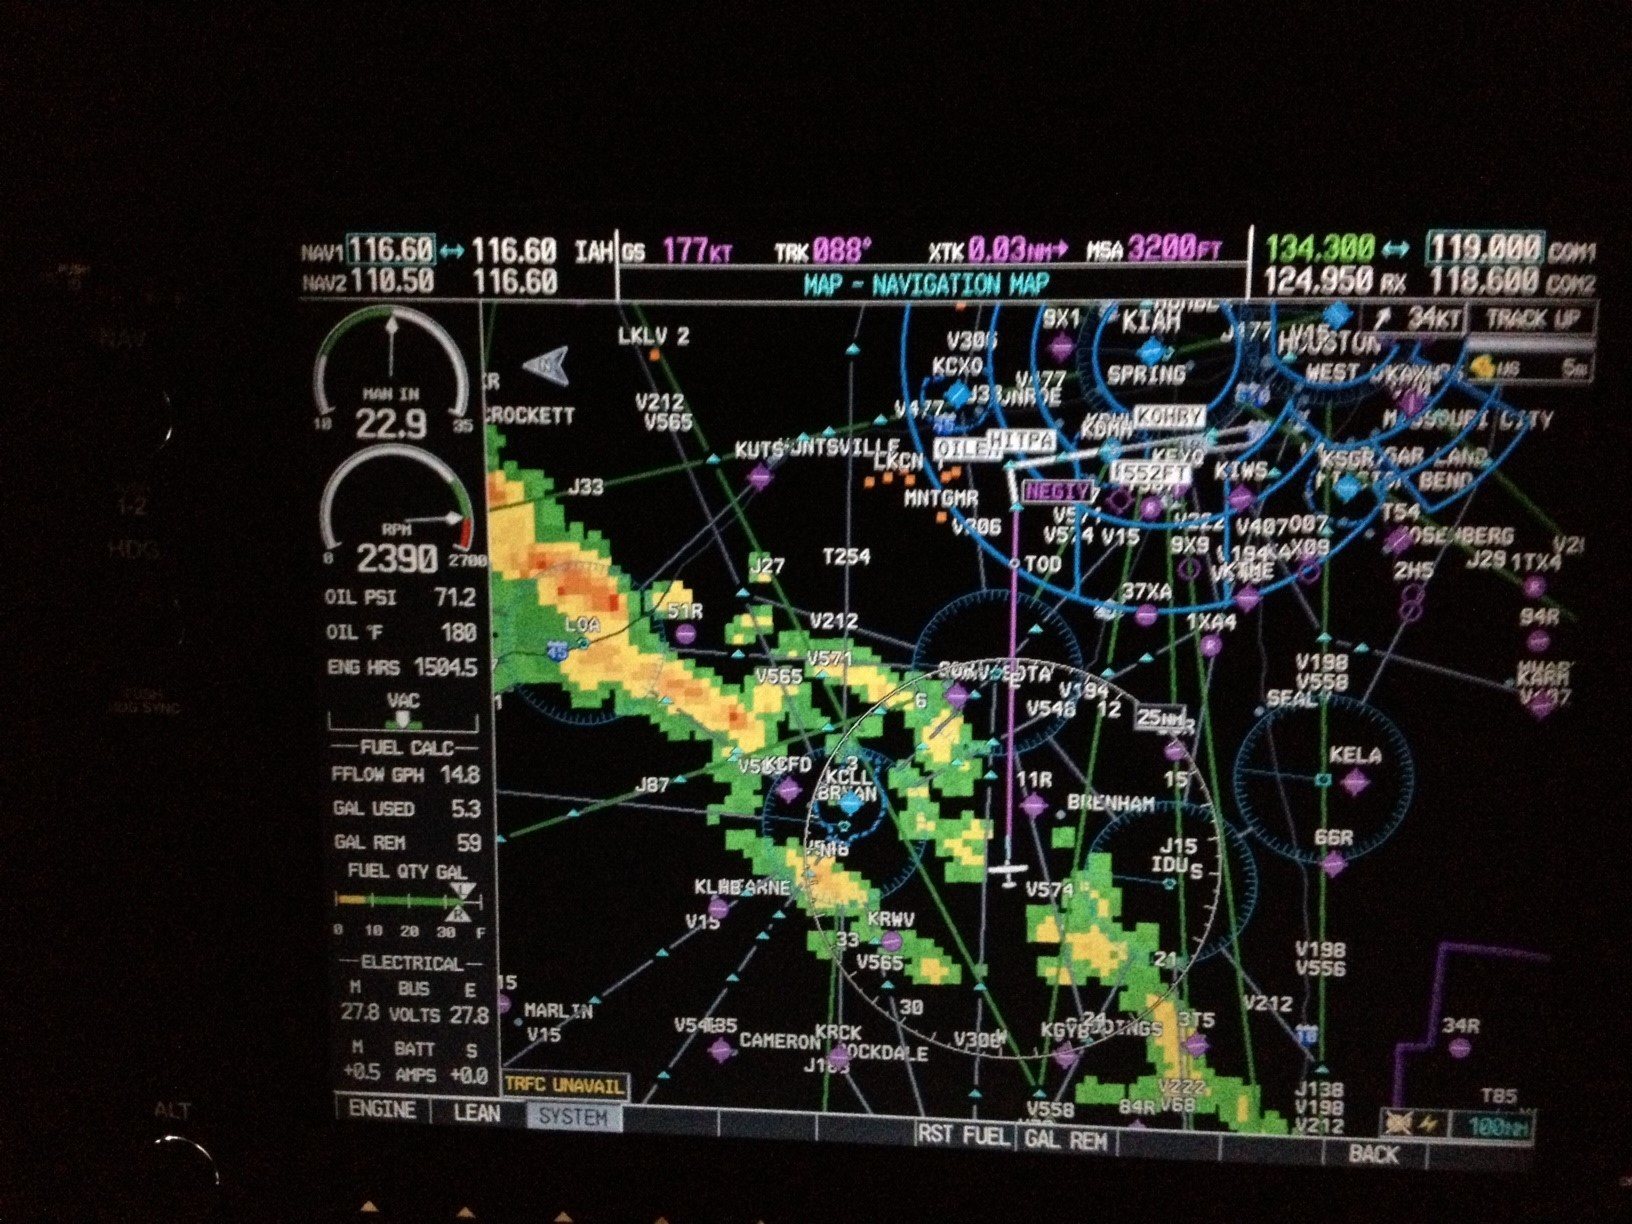 Common G1000 Mistakes, Part II